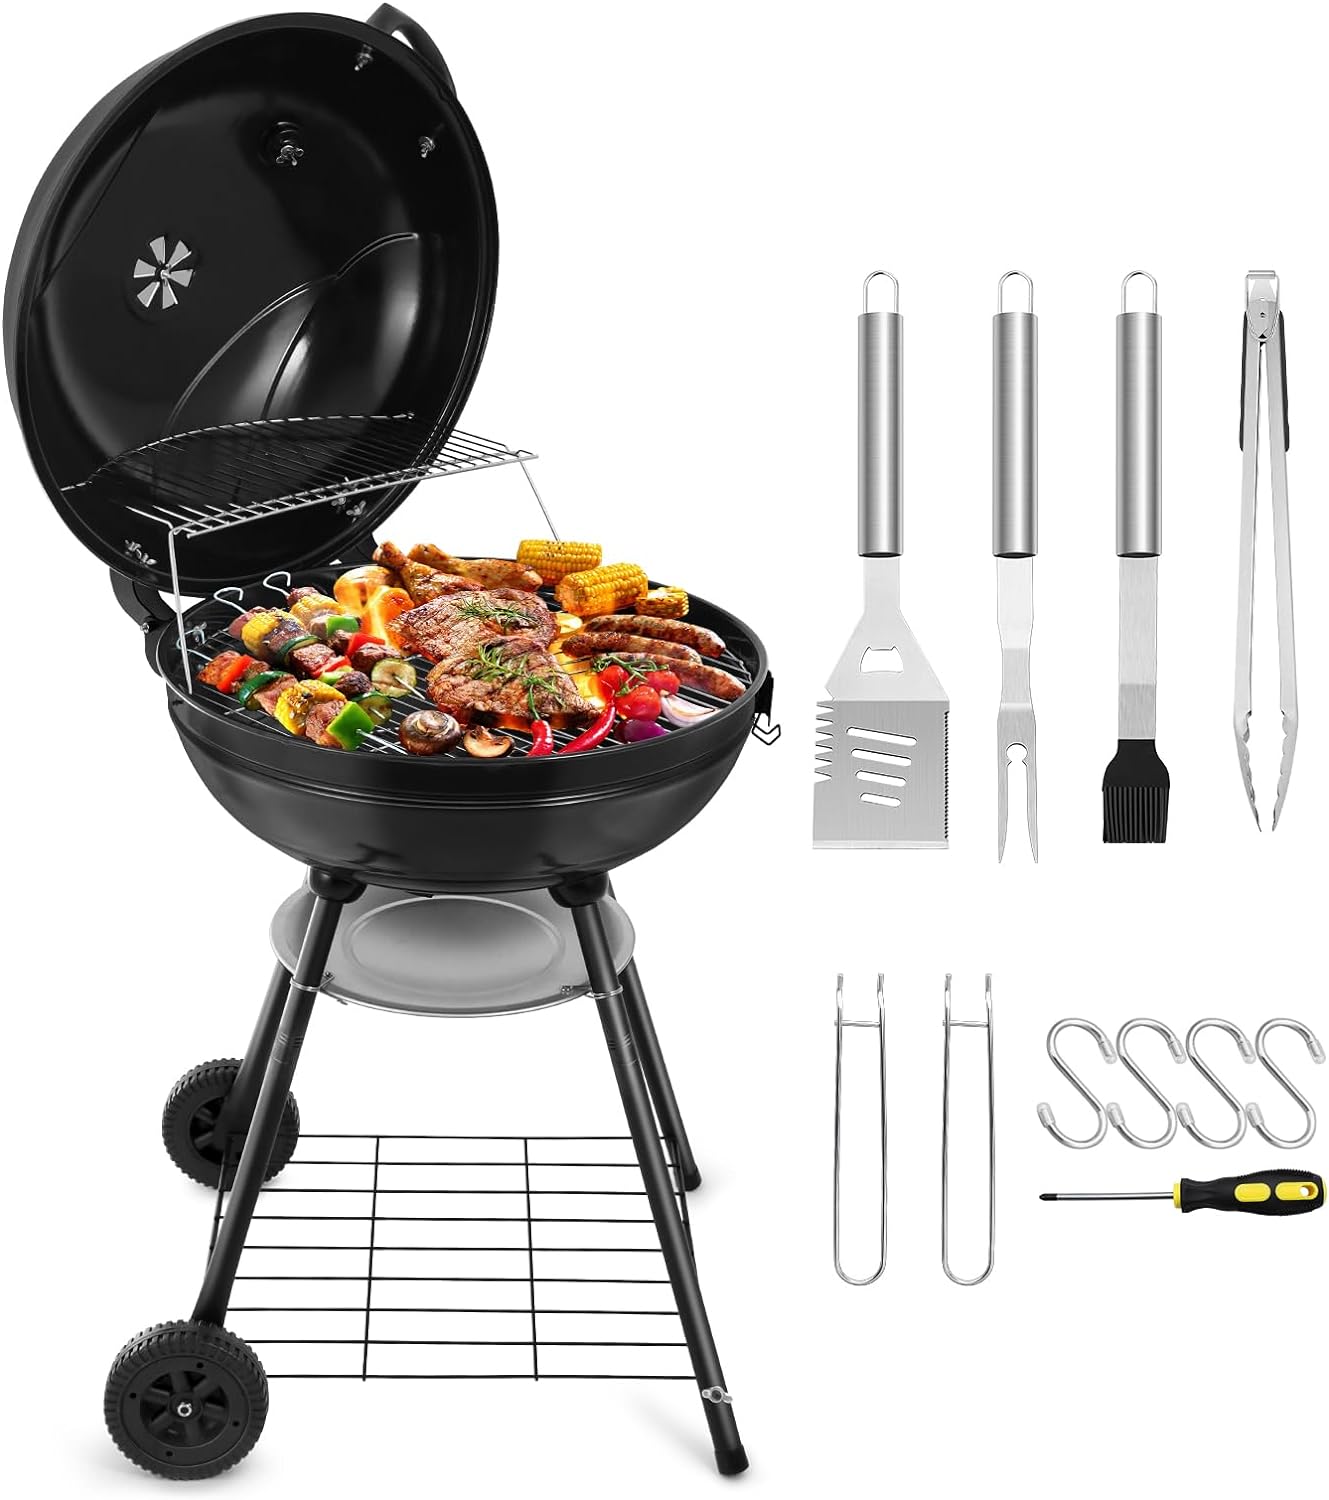 22-inch Charcoal Kettle Grill Set Review